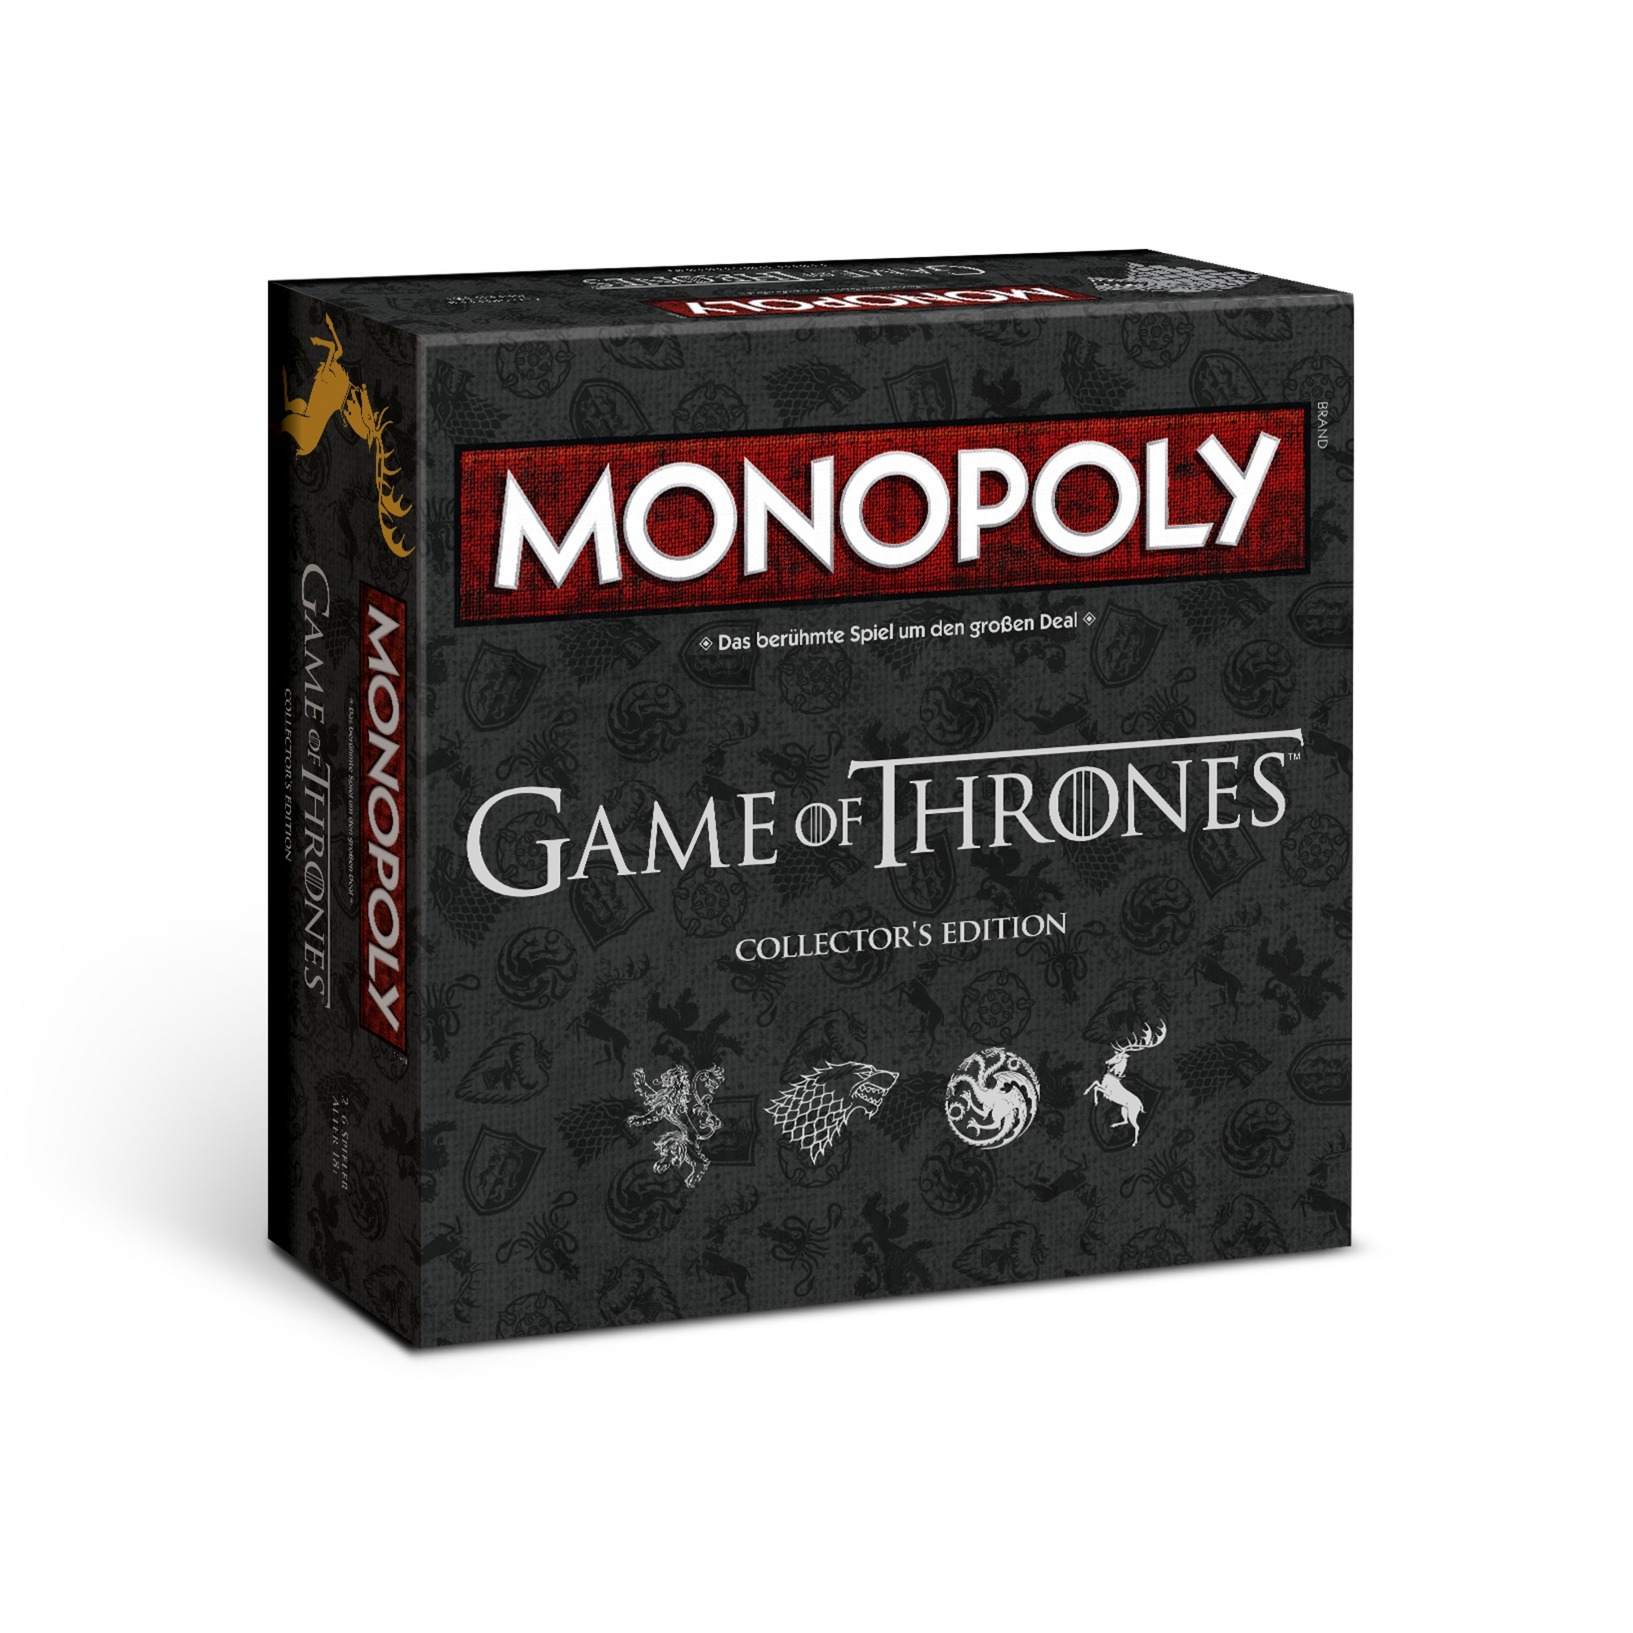 Monopoly Game of Thrones Collector s Edition Brettspiel